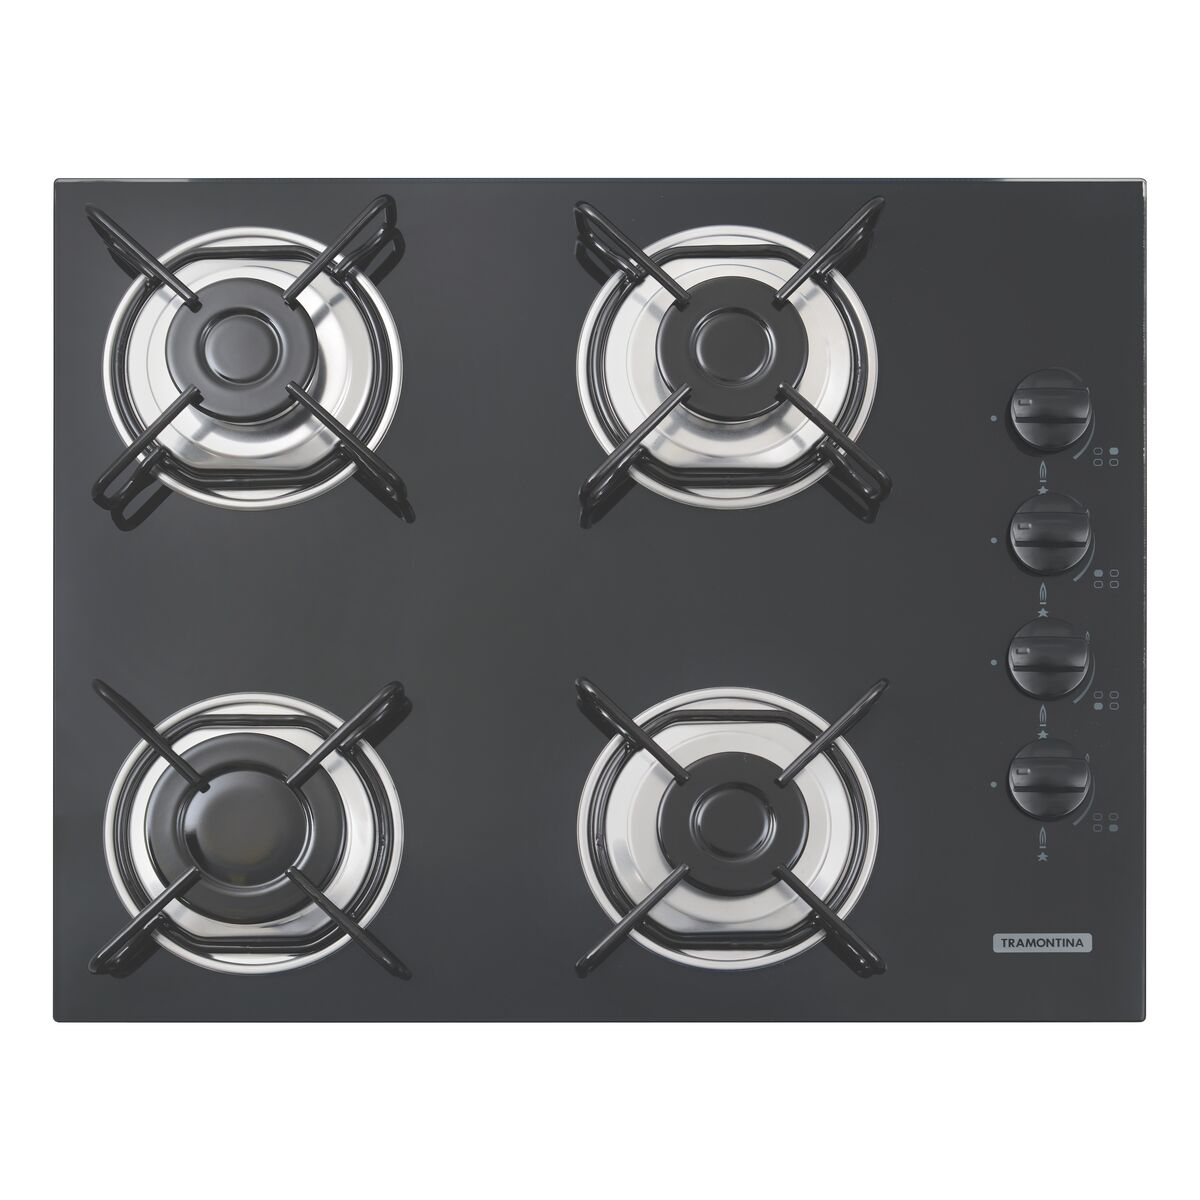 Tramontina gas cooktop in black tempered glass with carbon steel trivets, Super Automatic switch-on, and 4 burners